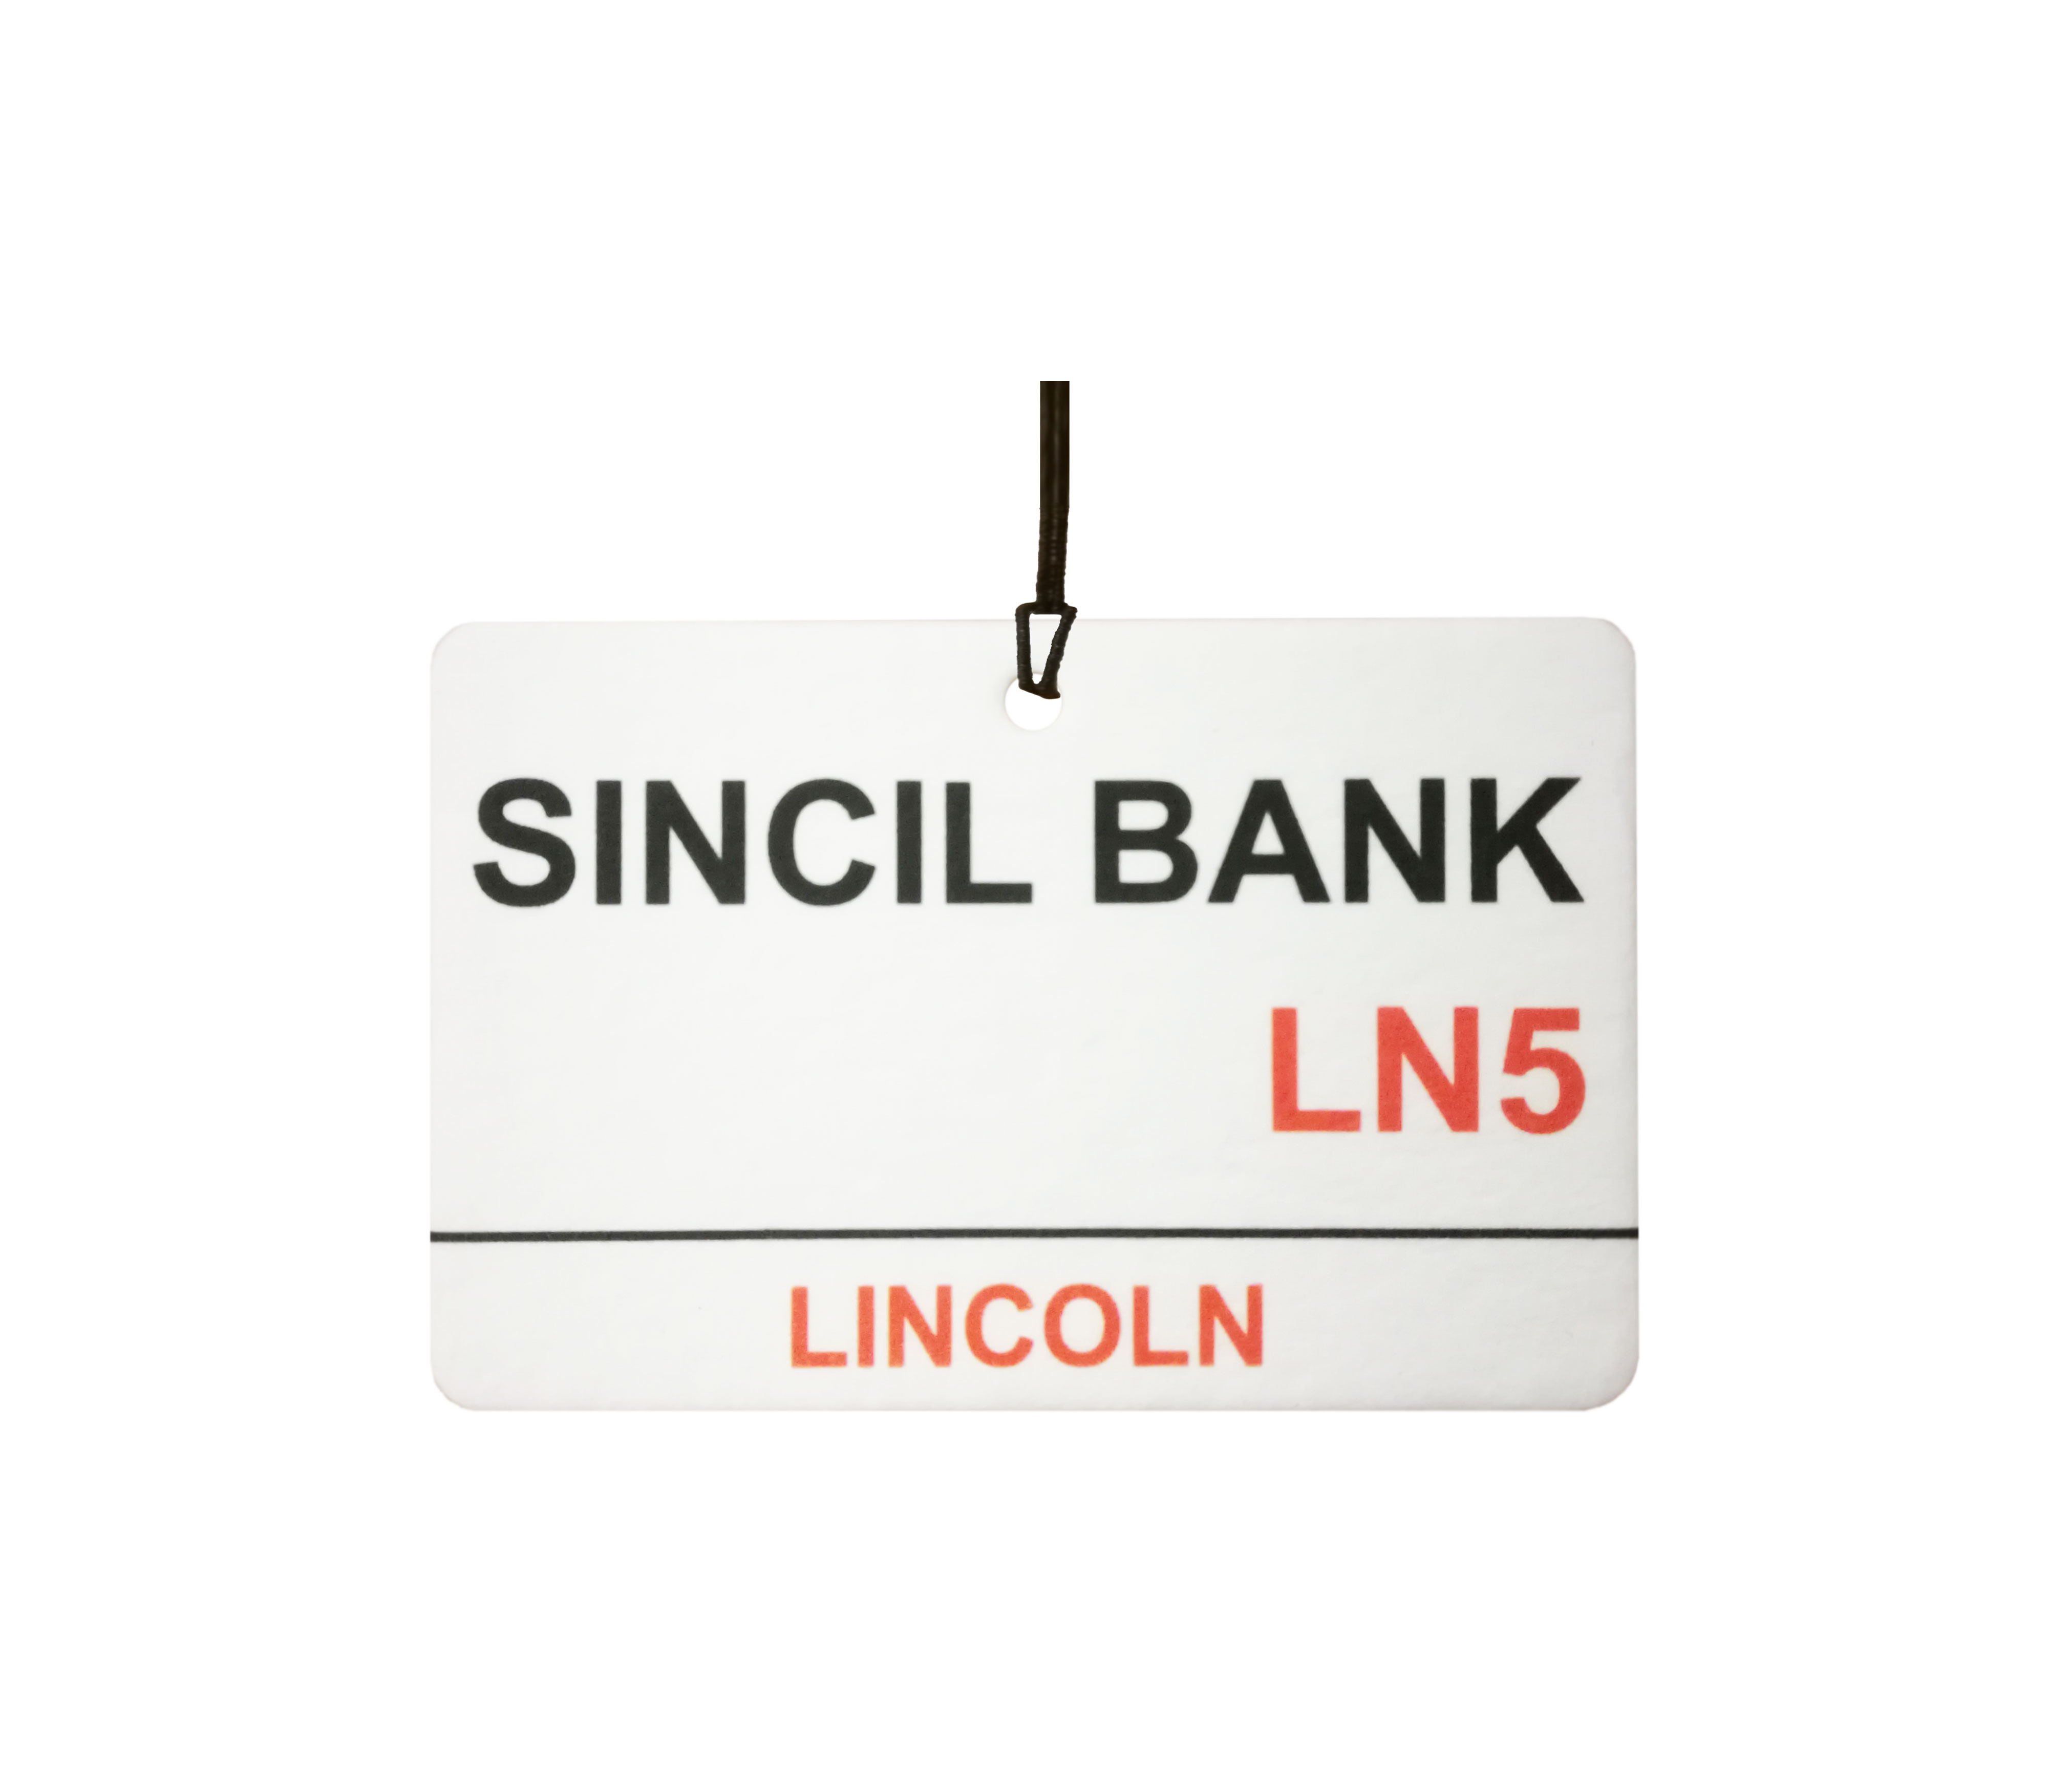 Lincoln / Sincil Bank Street Sign